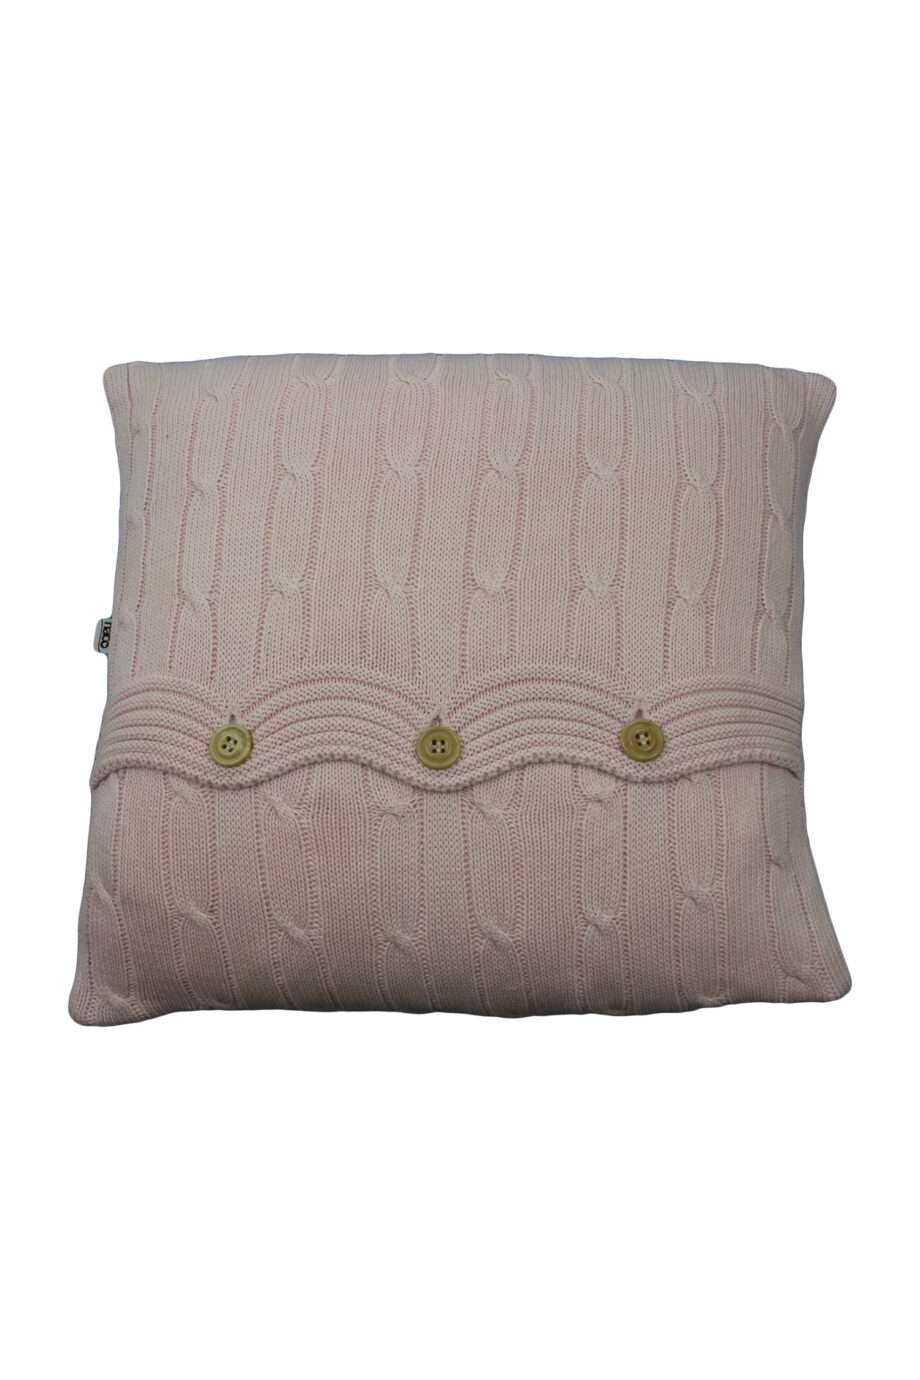 twist baby pink knitted cotton pillowcase xsmall